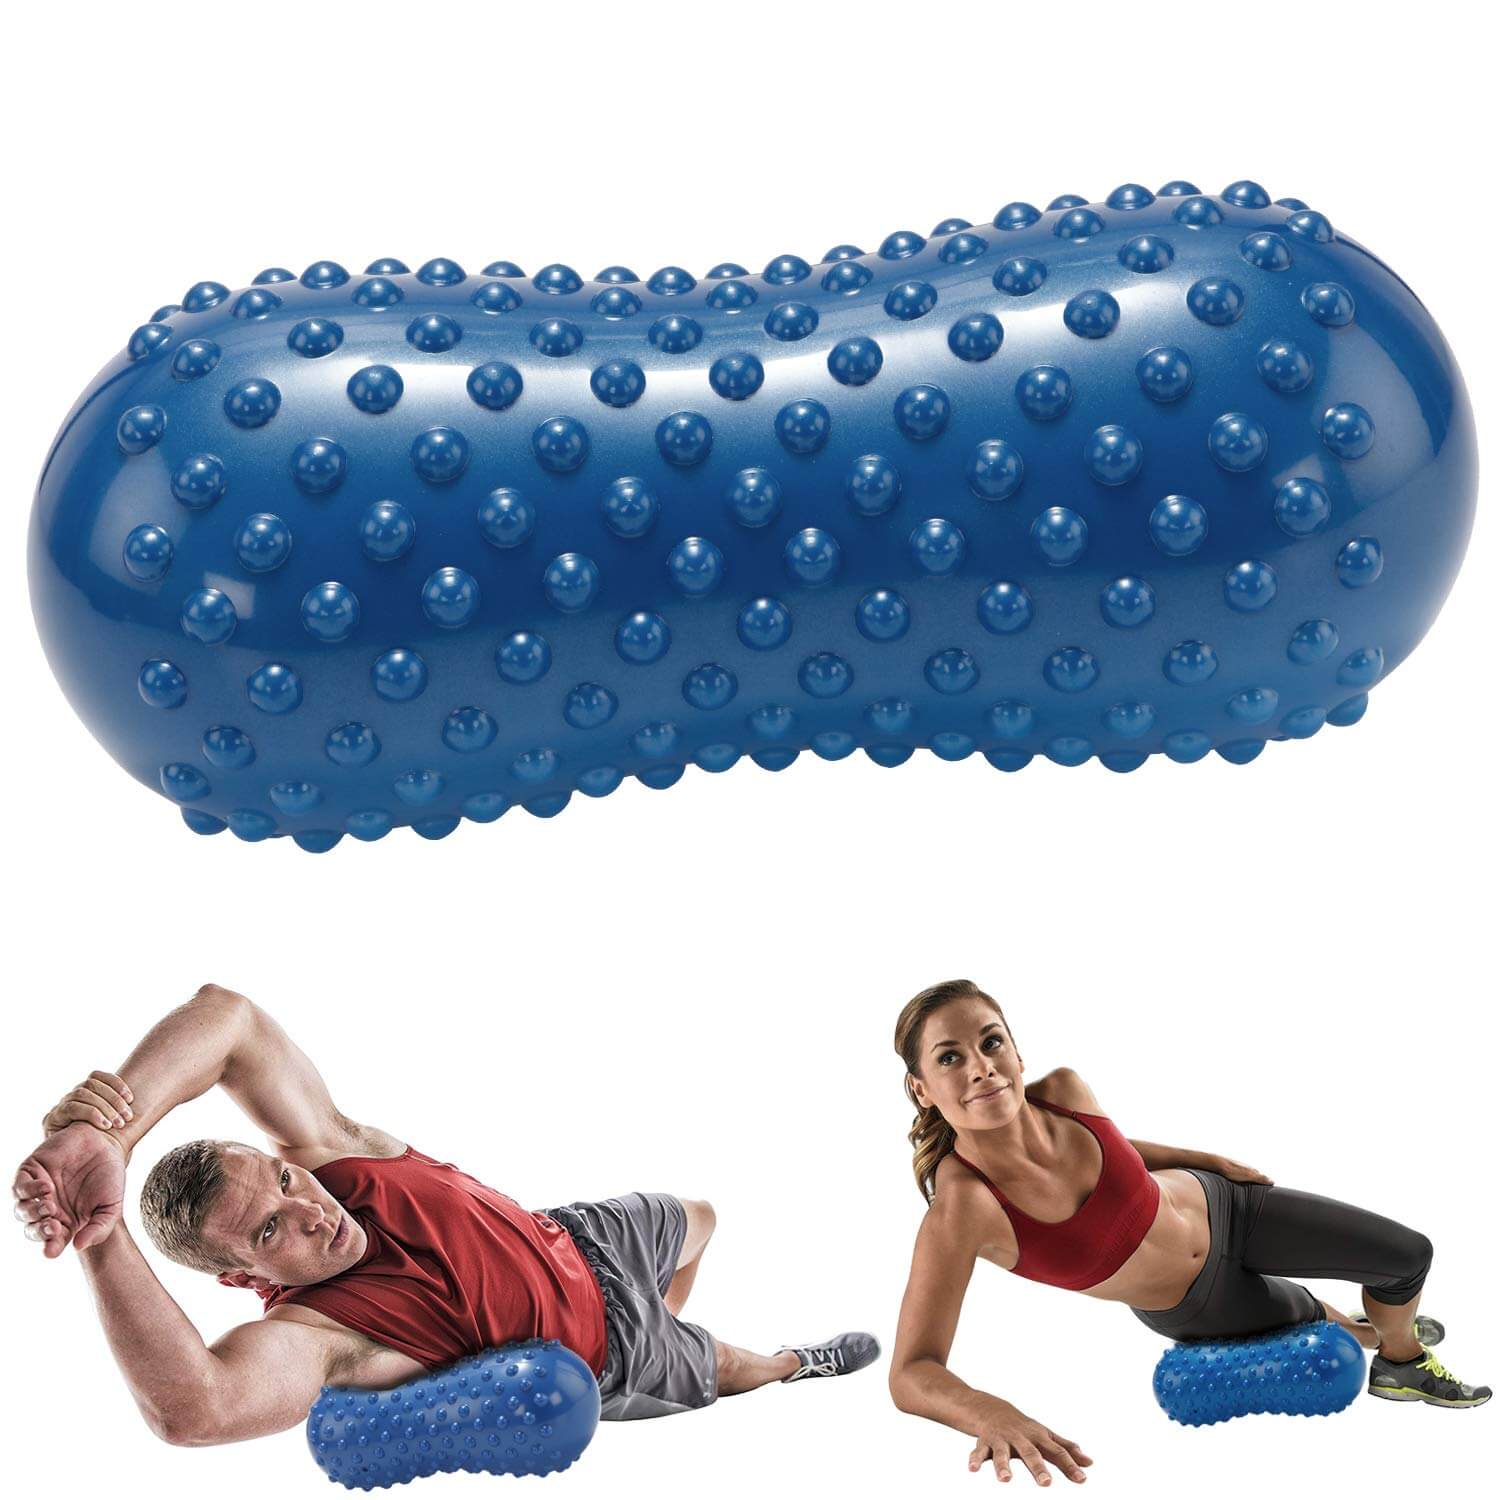 Fitness Mad Peanut Massage Ball Muscle Relaxation Physio Roller Fitness Rehab